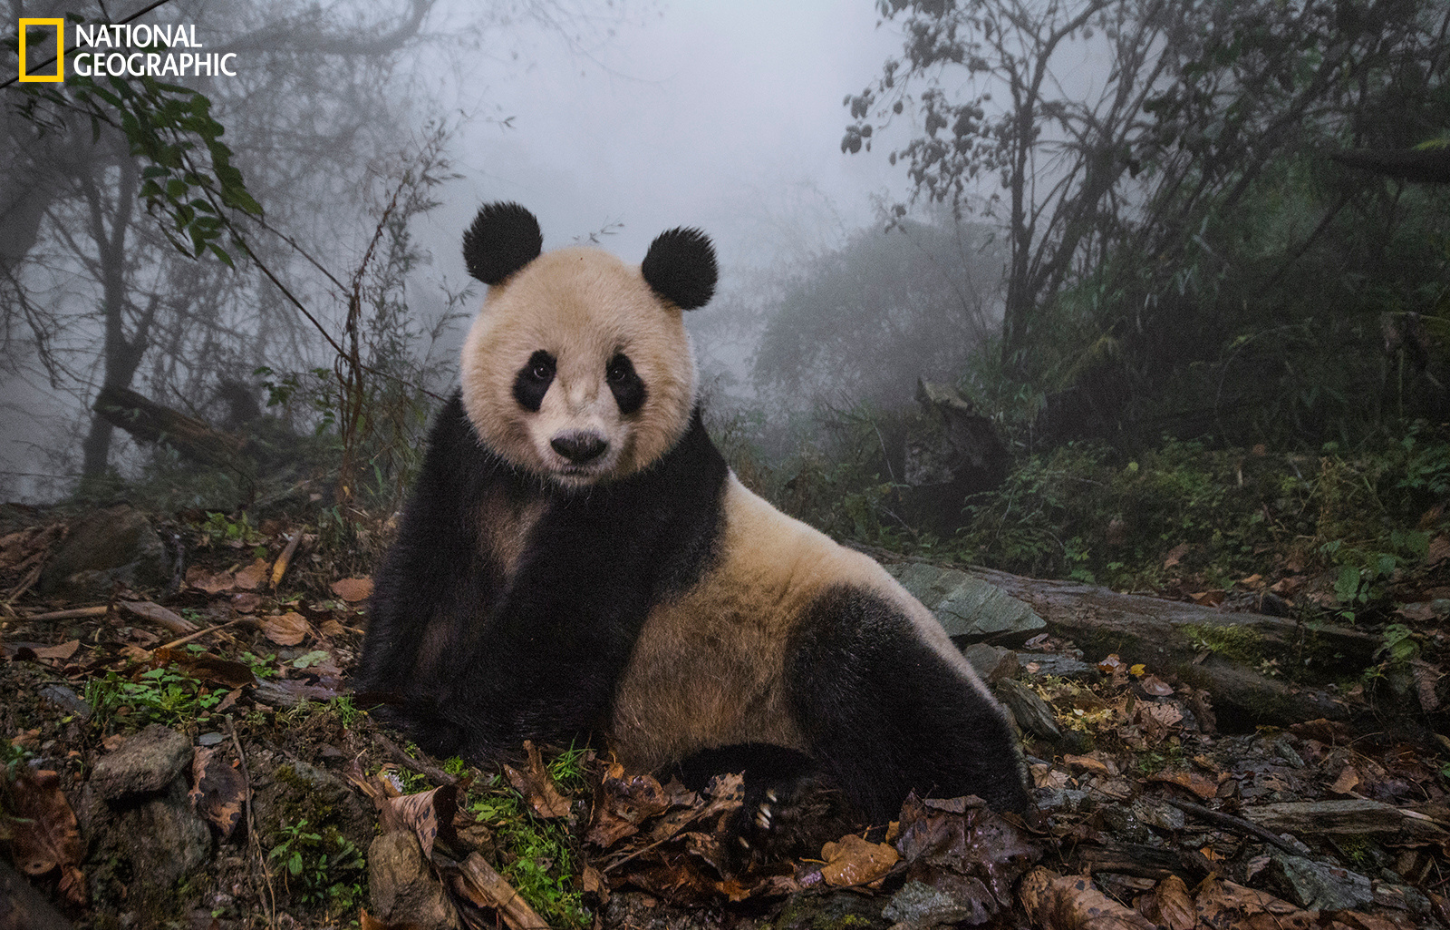 A photo of a panda bear laying in a forest